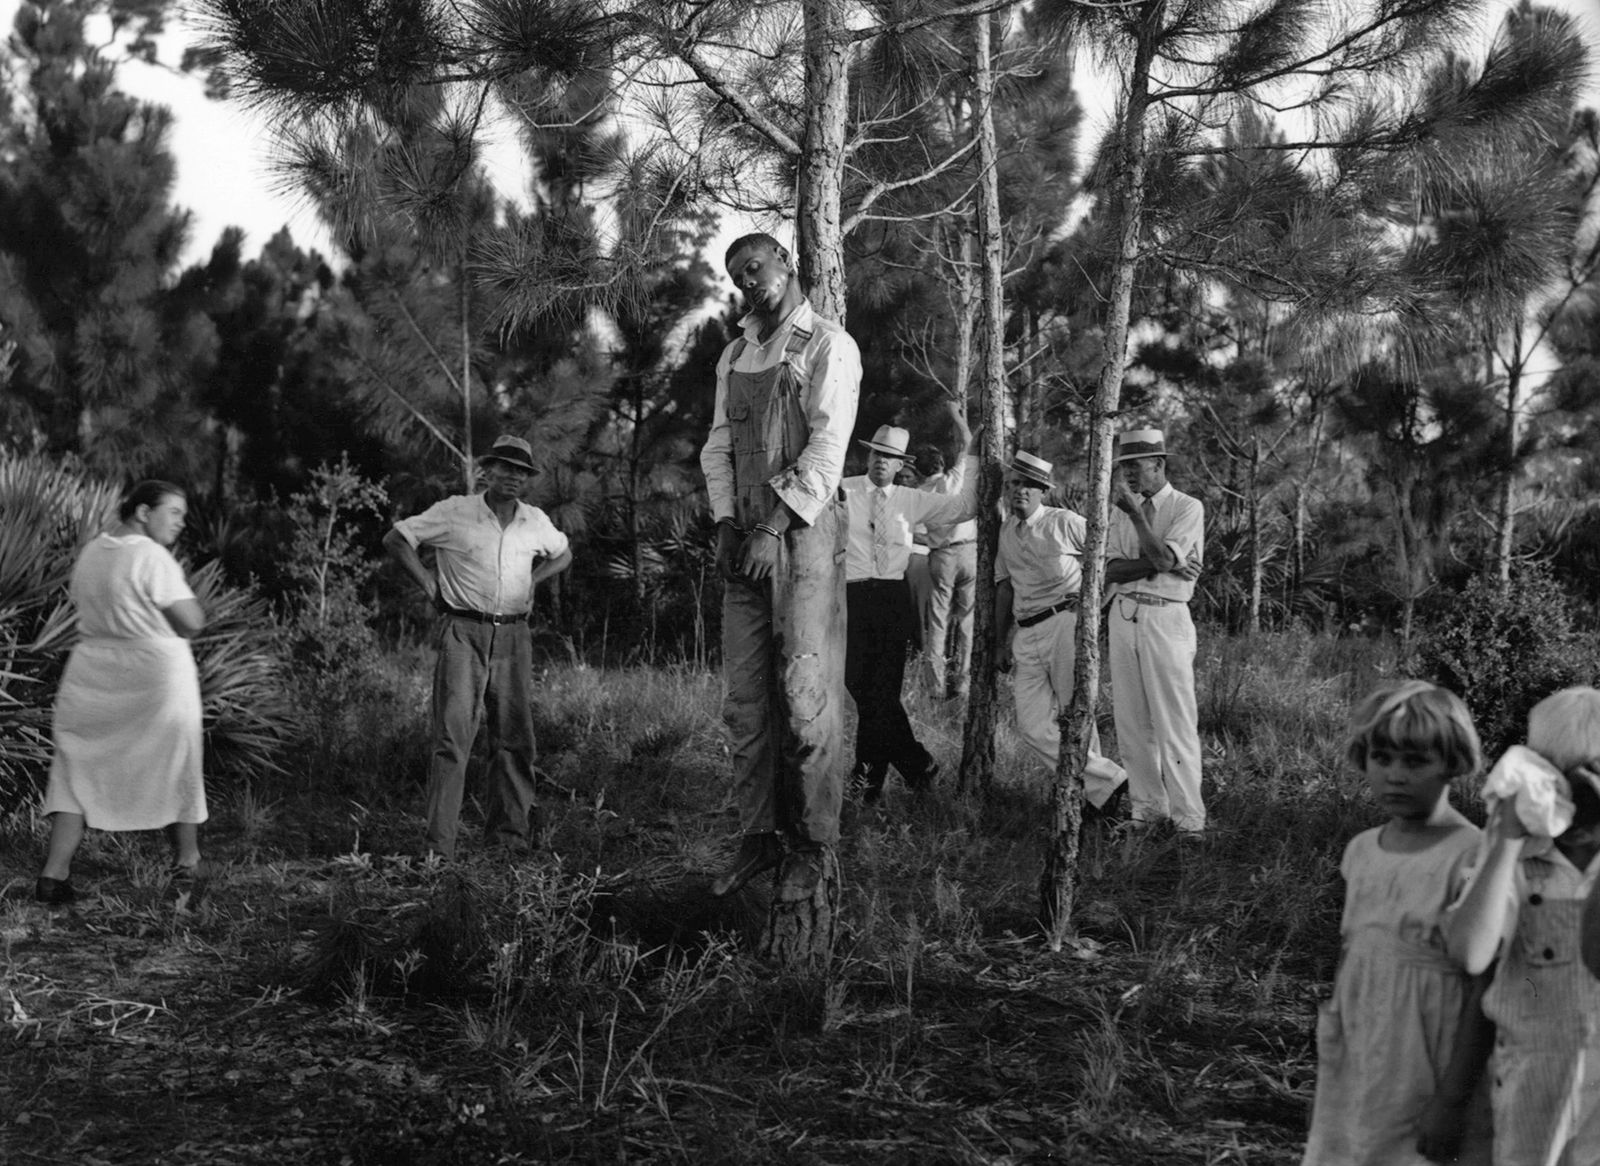 Lynching | Definition, History, & Facts | Britannica